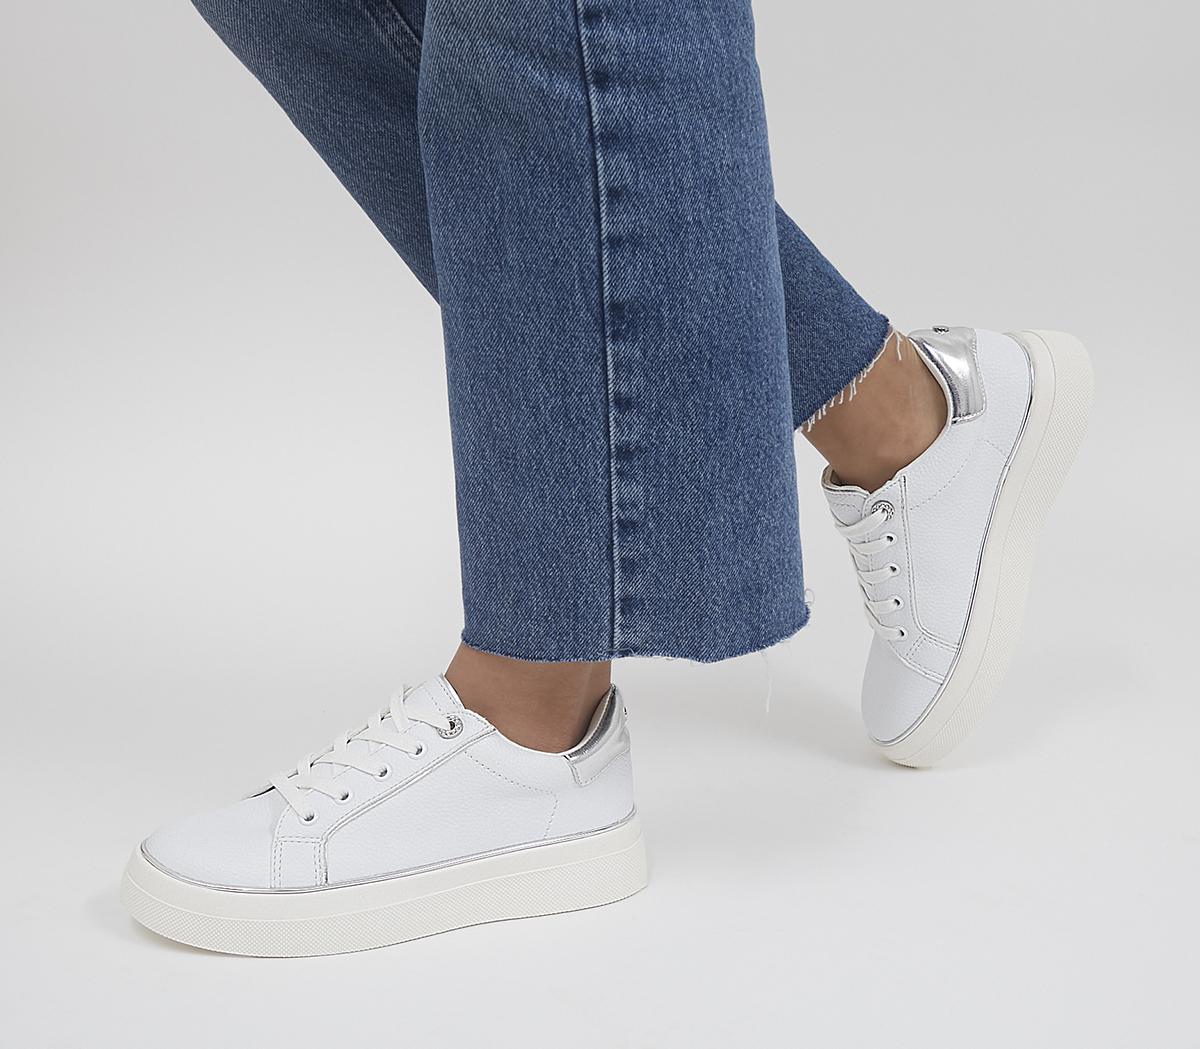 OfficeFaded Flatform Lace Up TrainersWhite With Metallic Rand